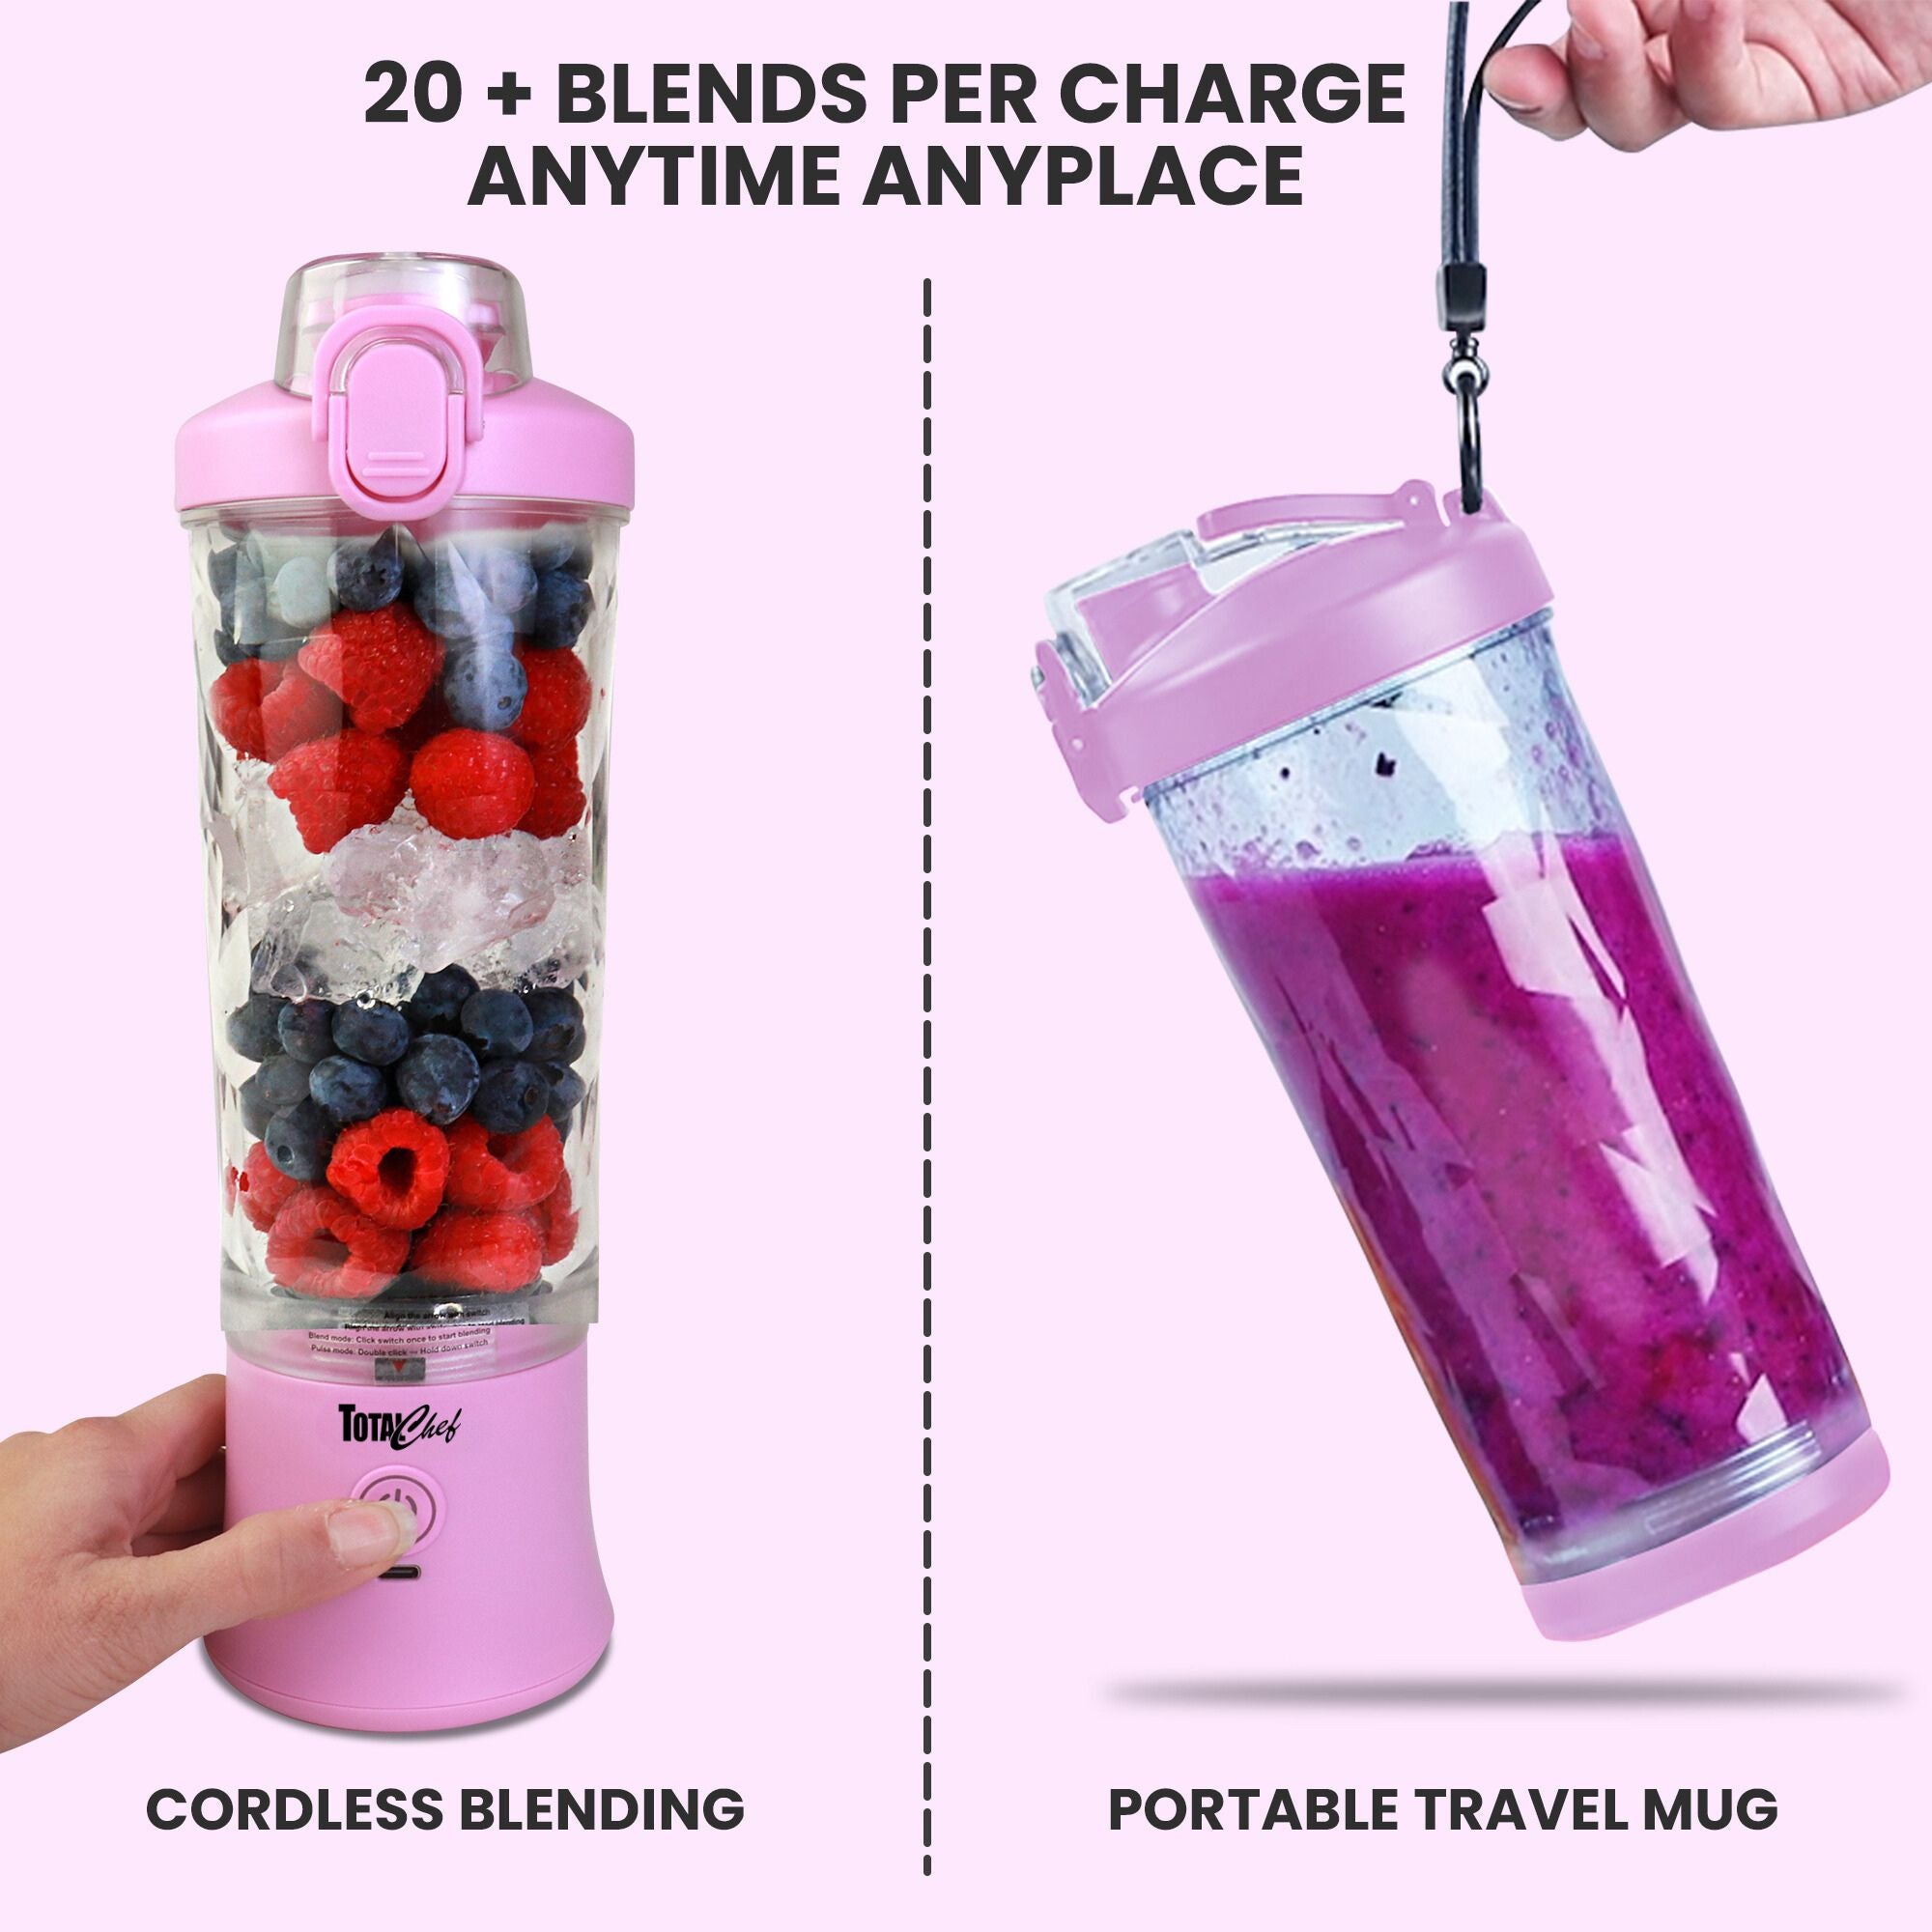 Left half shows a person's hand holding the blender, which is filled with raspberries, blueberries, and ice cubes, with their thumb on the power button. Text below reads, "Cordless blending." Right half shows a person's hand holding the blending jar, which is filled with bright purple smoothie and has the travel base cover on, by the carry strap. Text below reads, "Portable travel mug." Text at the top reads, "20+ blends per charge anytime anyplace."